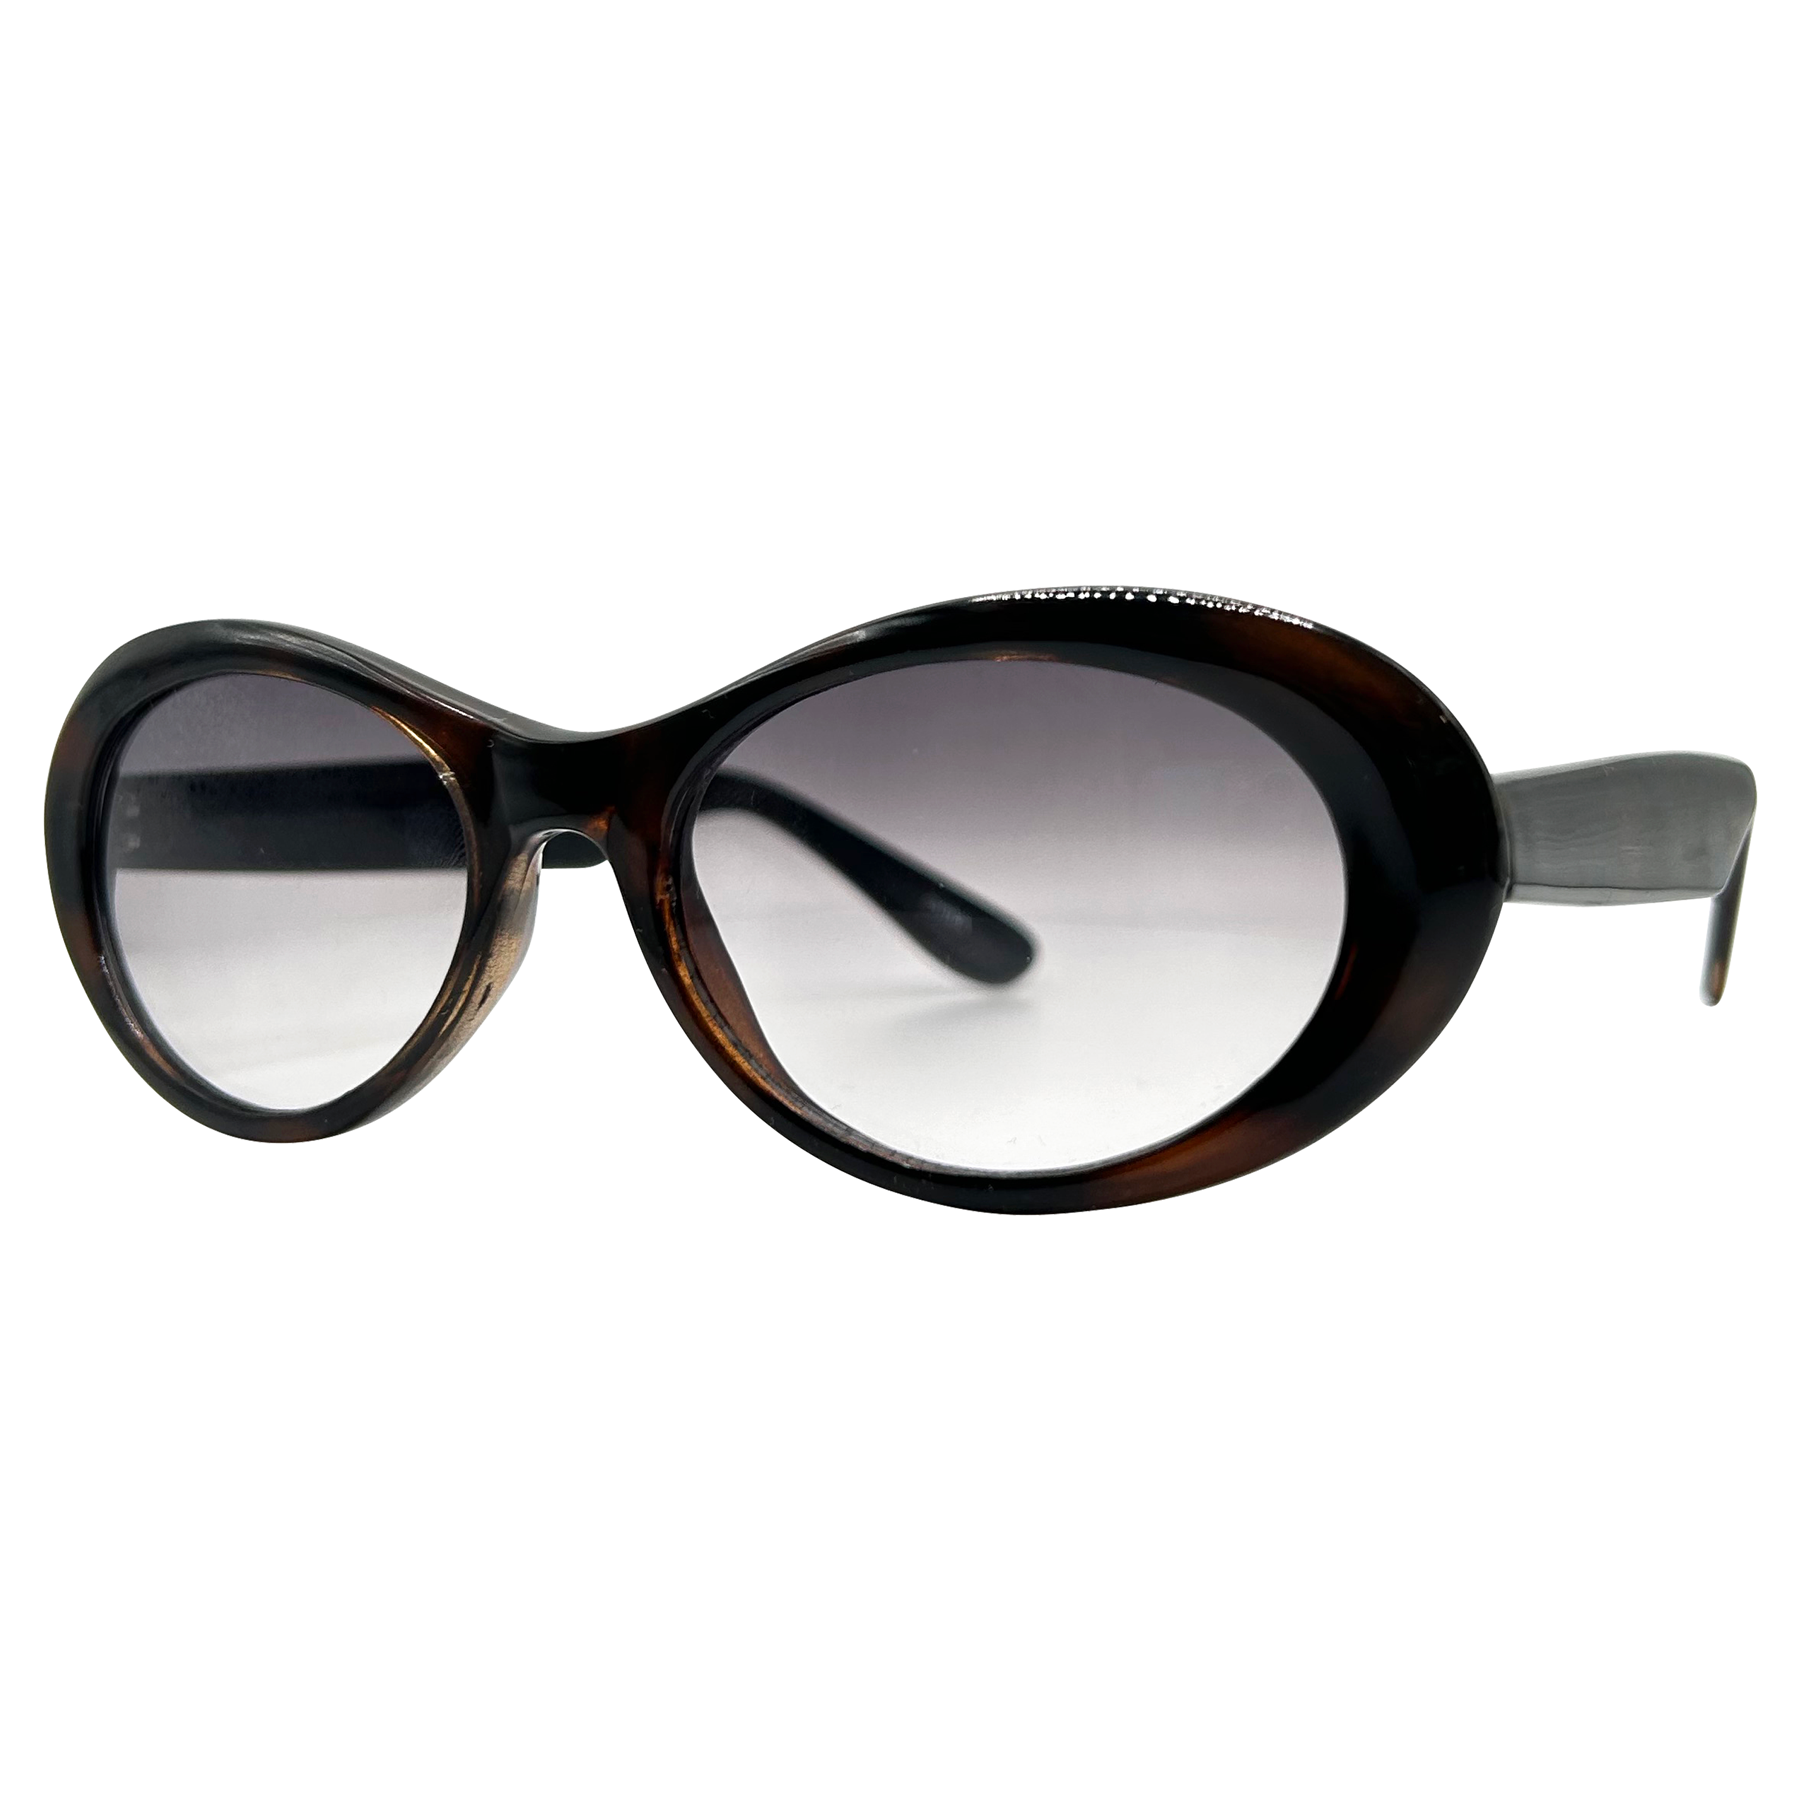 TIZZY Oval Sunglasses